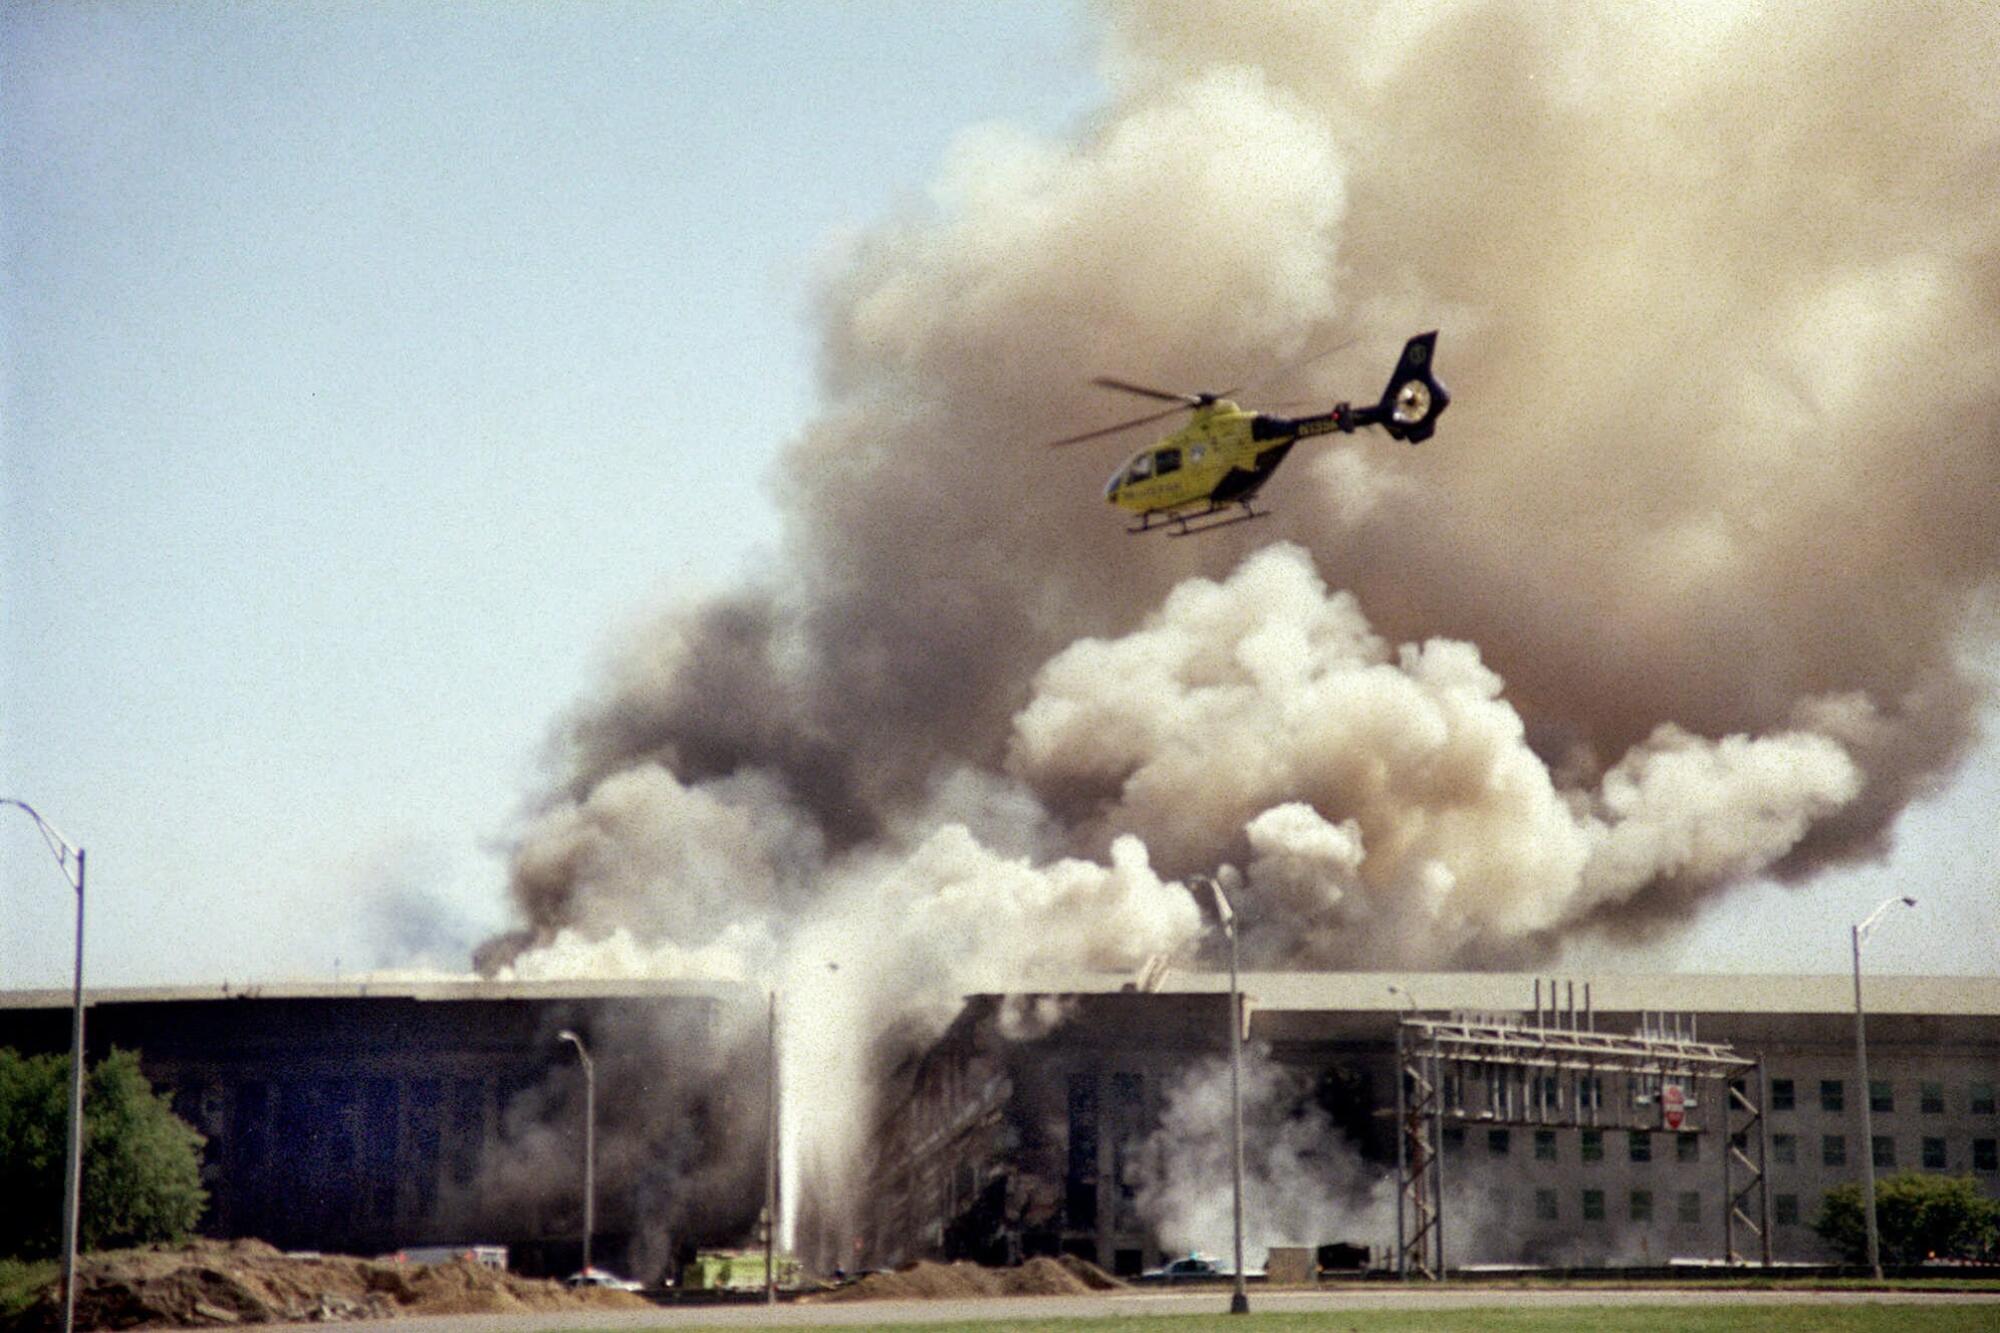 A helicopter flies over the smoking Pentagon building